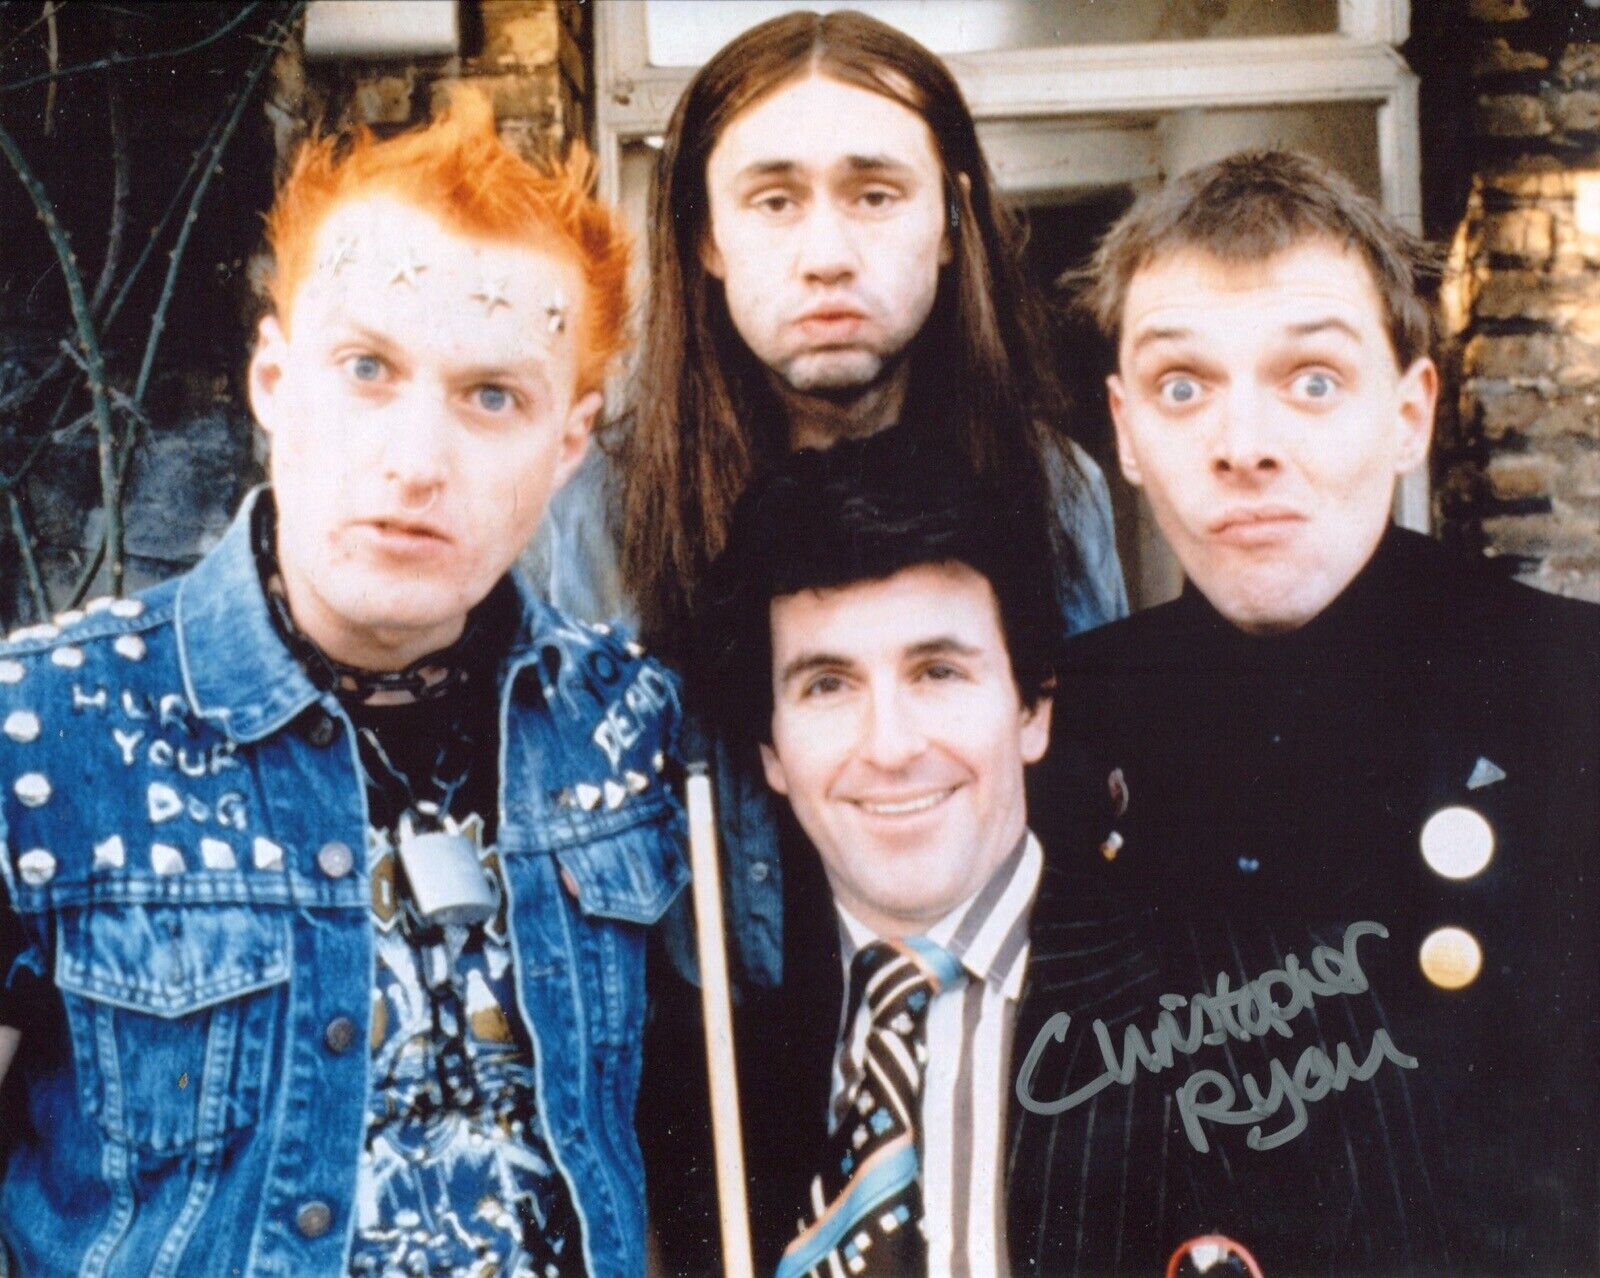 The Young Ones cult 8x10 comedy photo signed by actor Christopher Ryan. All autographs come with a